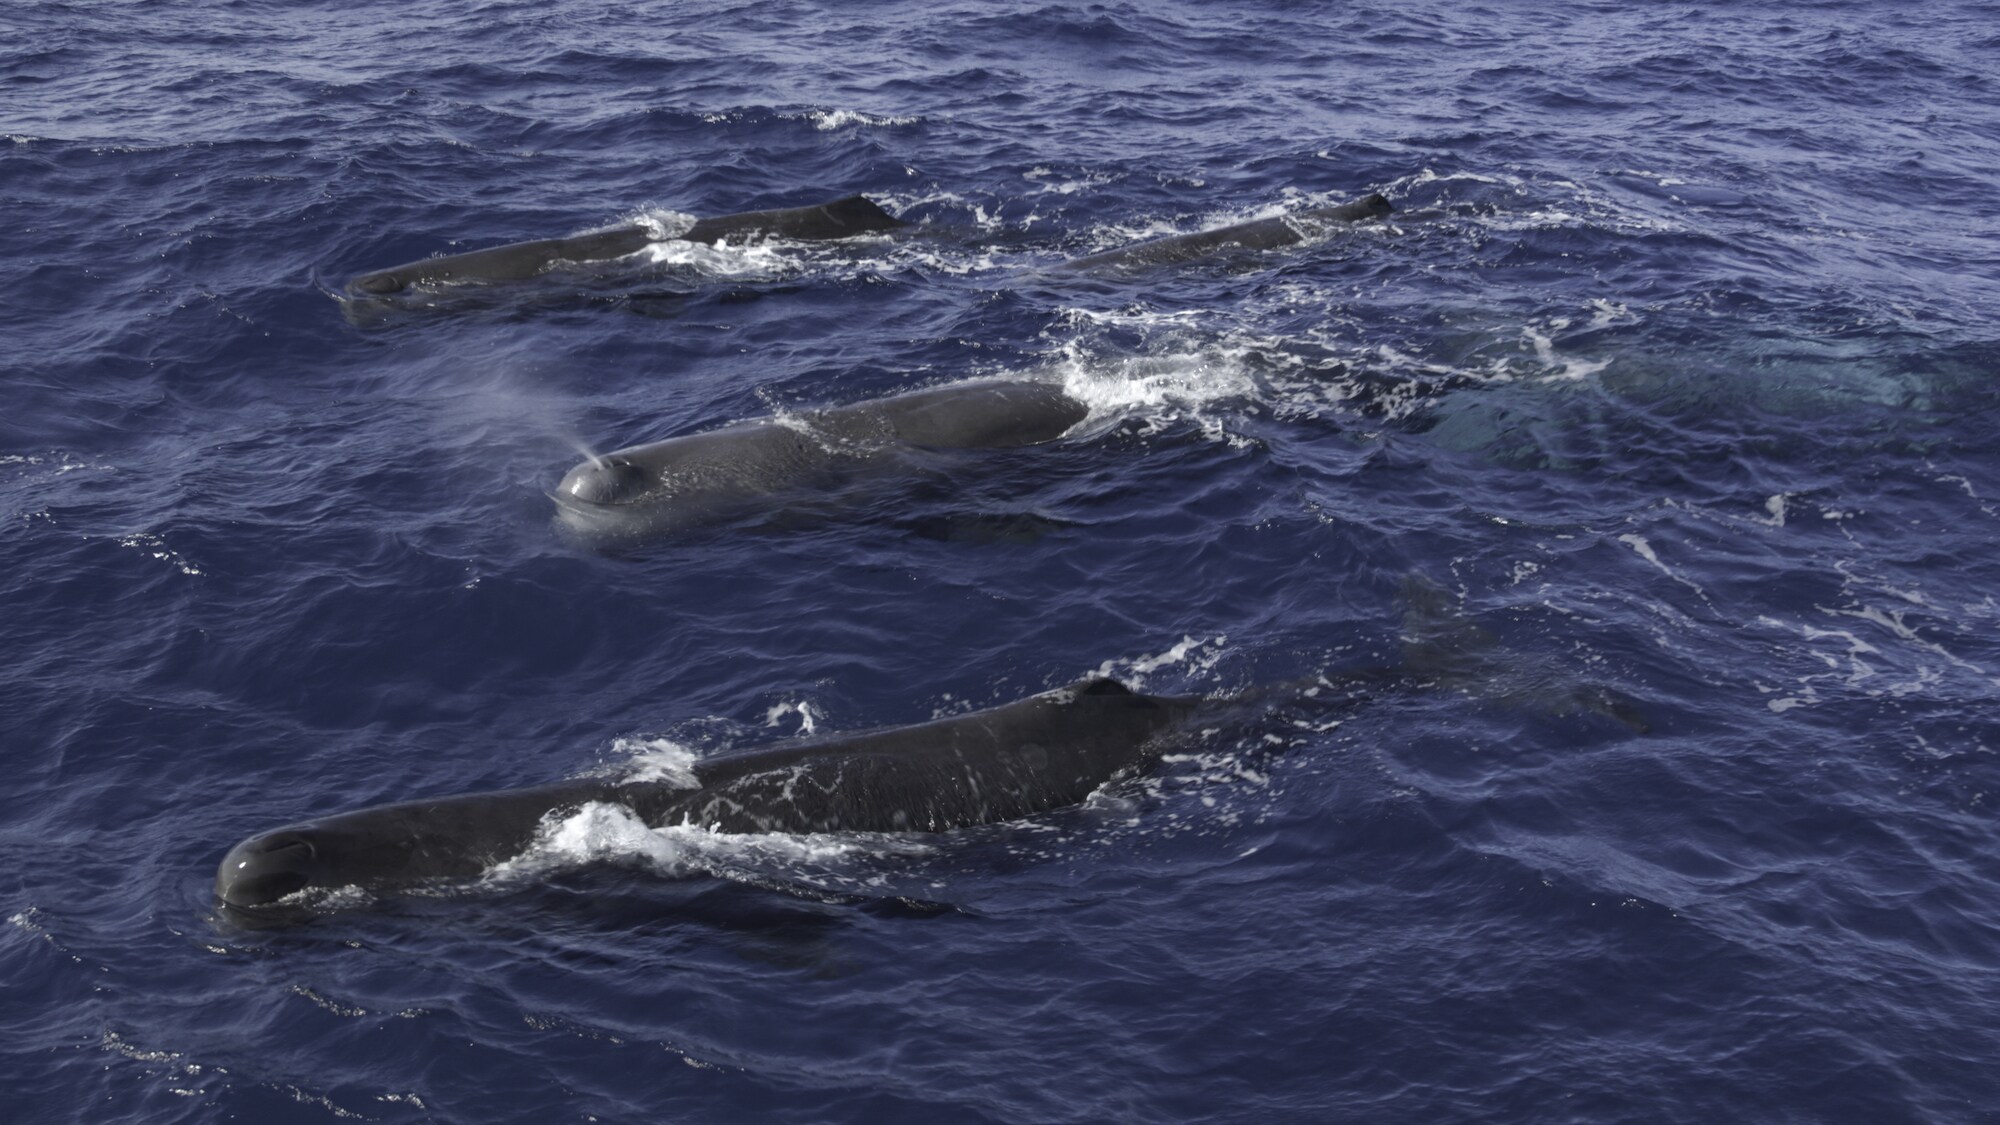 Sperm whales prefer to hunt far beneath the surface. They routinely stay an hour below and can explore as deep as 10,000 feet. (National Geographic for Disney+/Hayes Baxley)